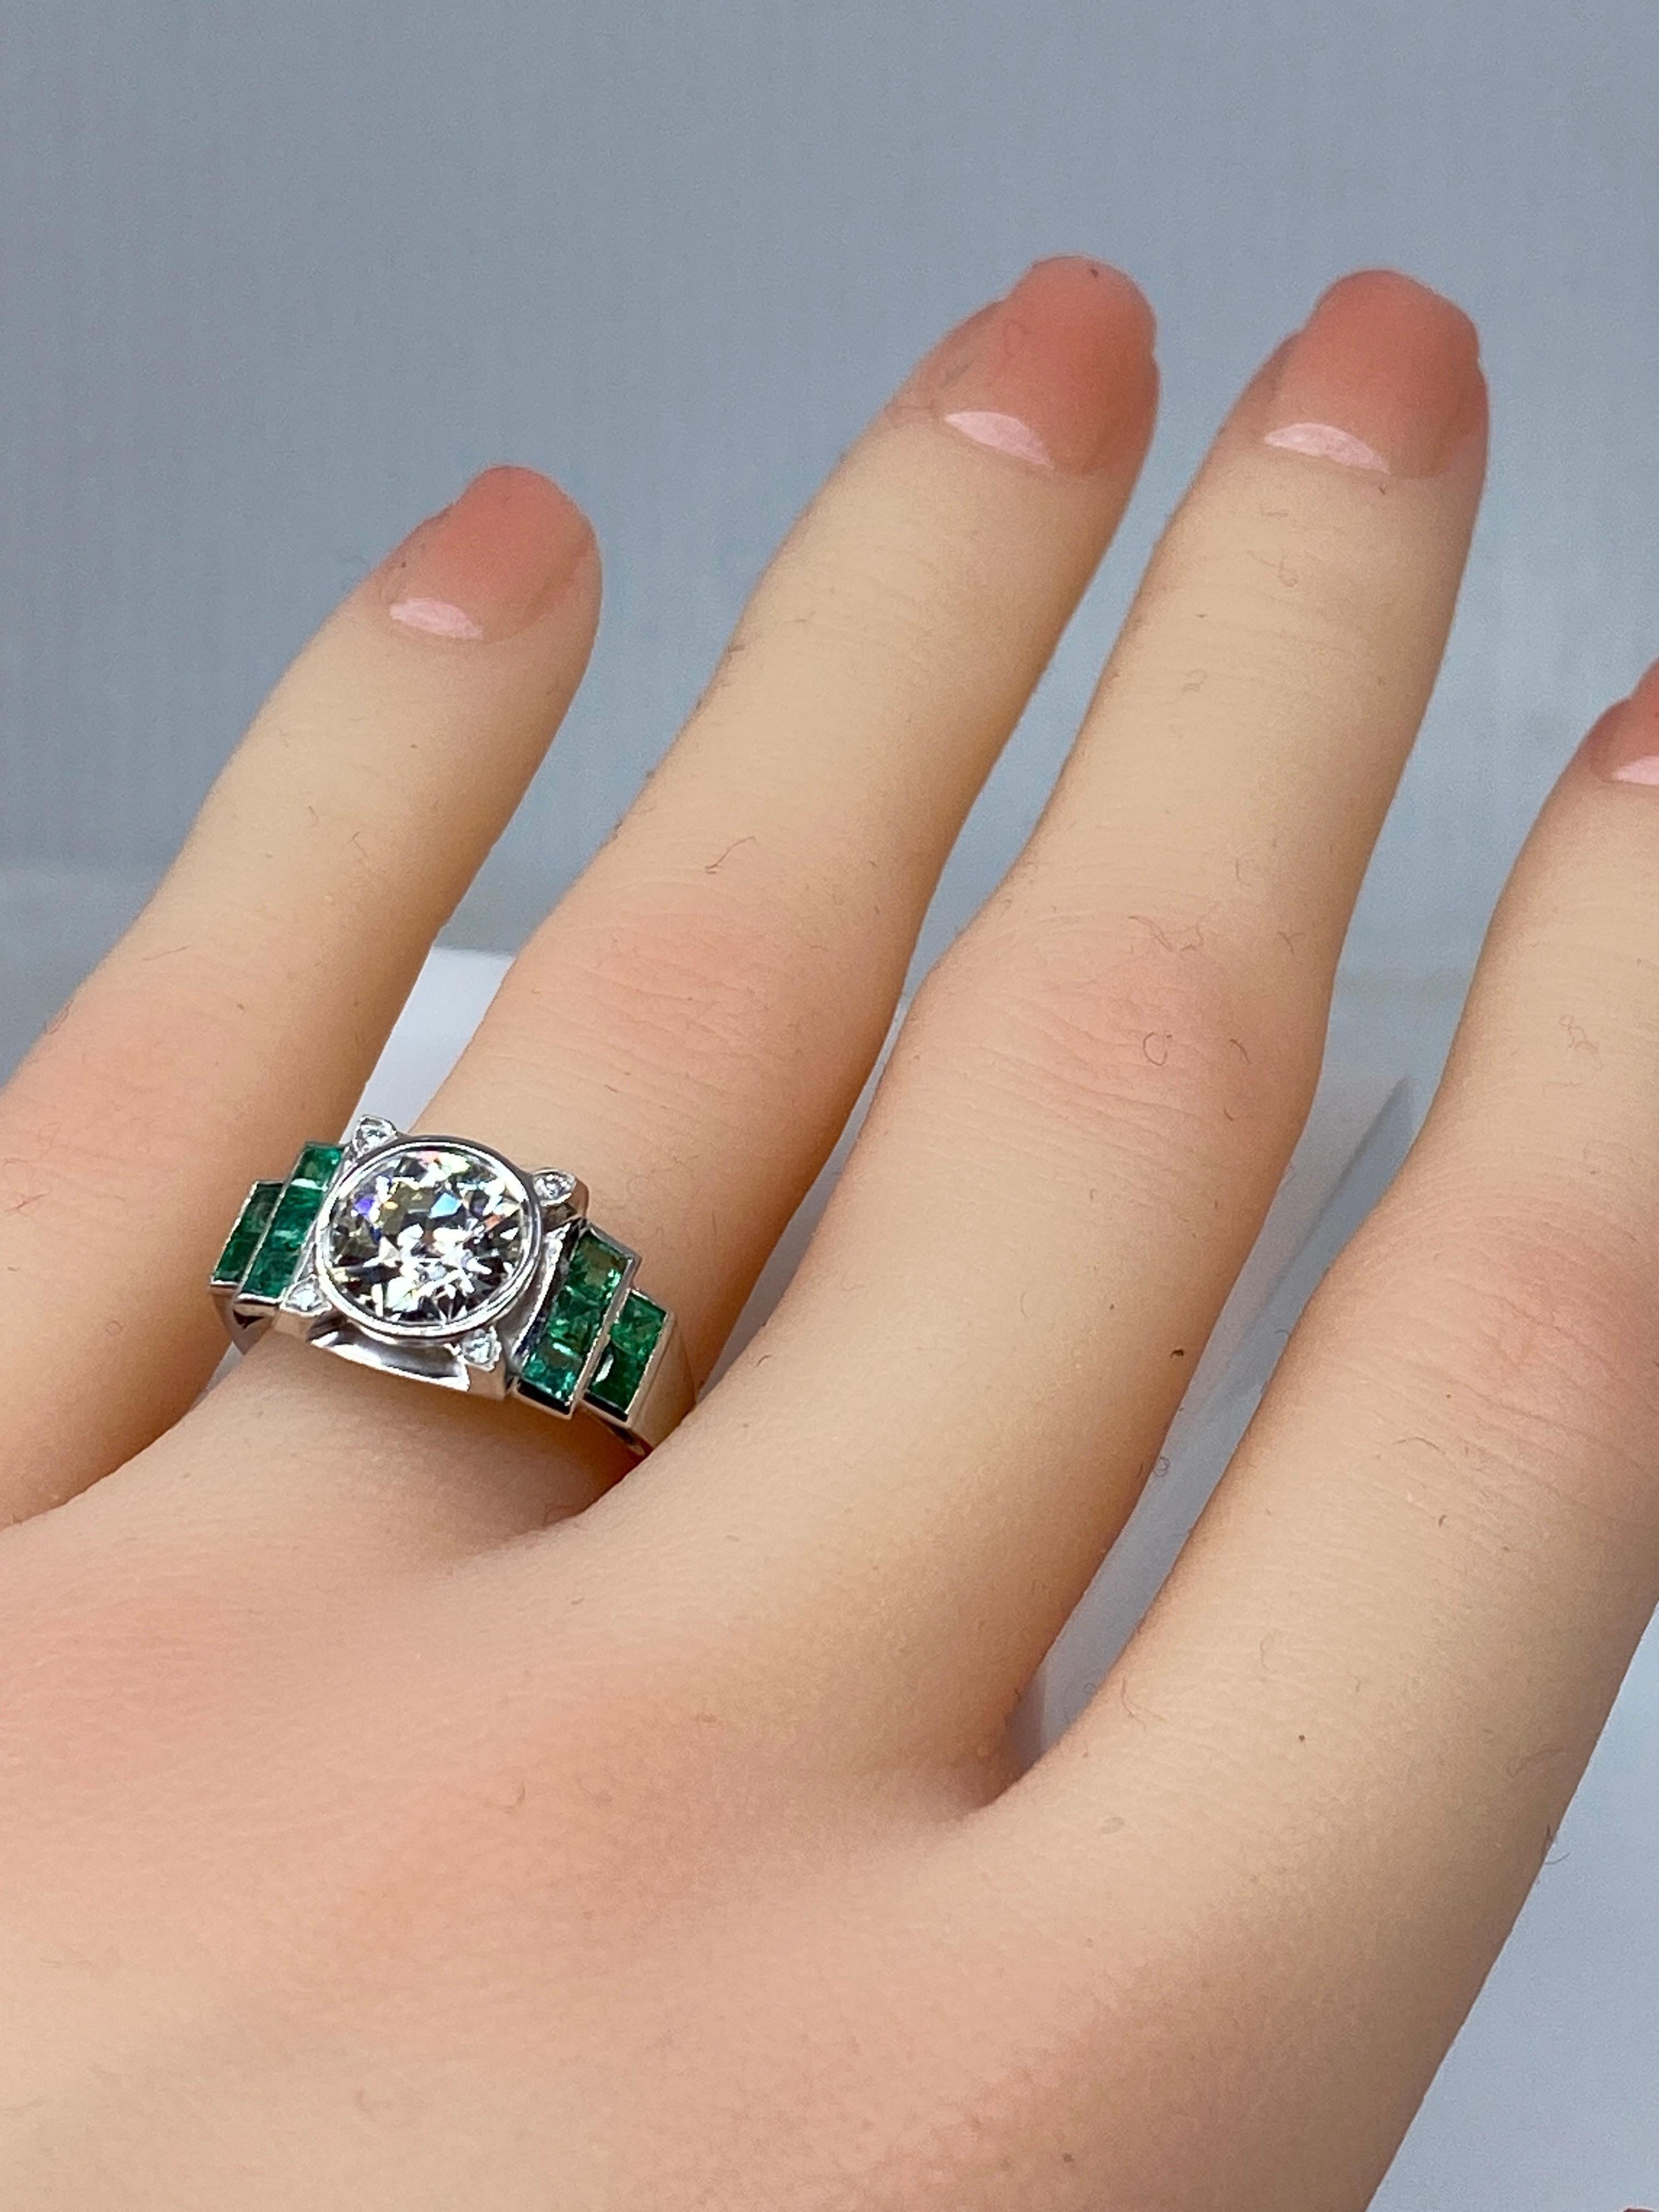 Platinium Engagement Ring Set with a 1.55 Carat Diamond Backed by Emeralds, 1900 For Sale 12